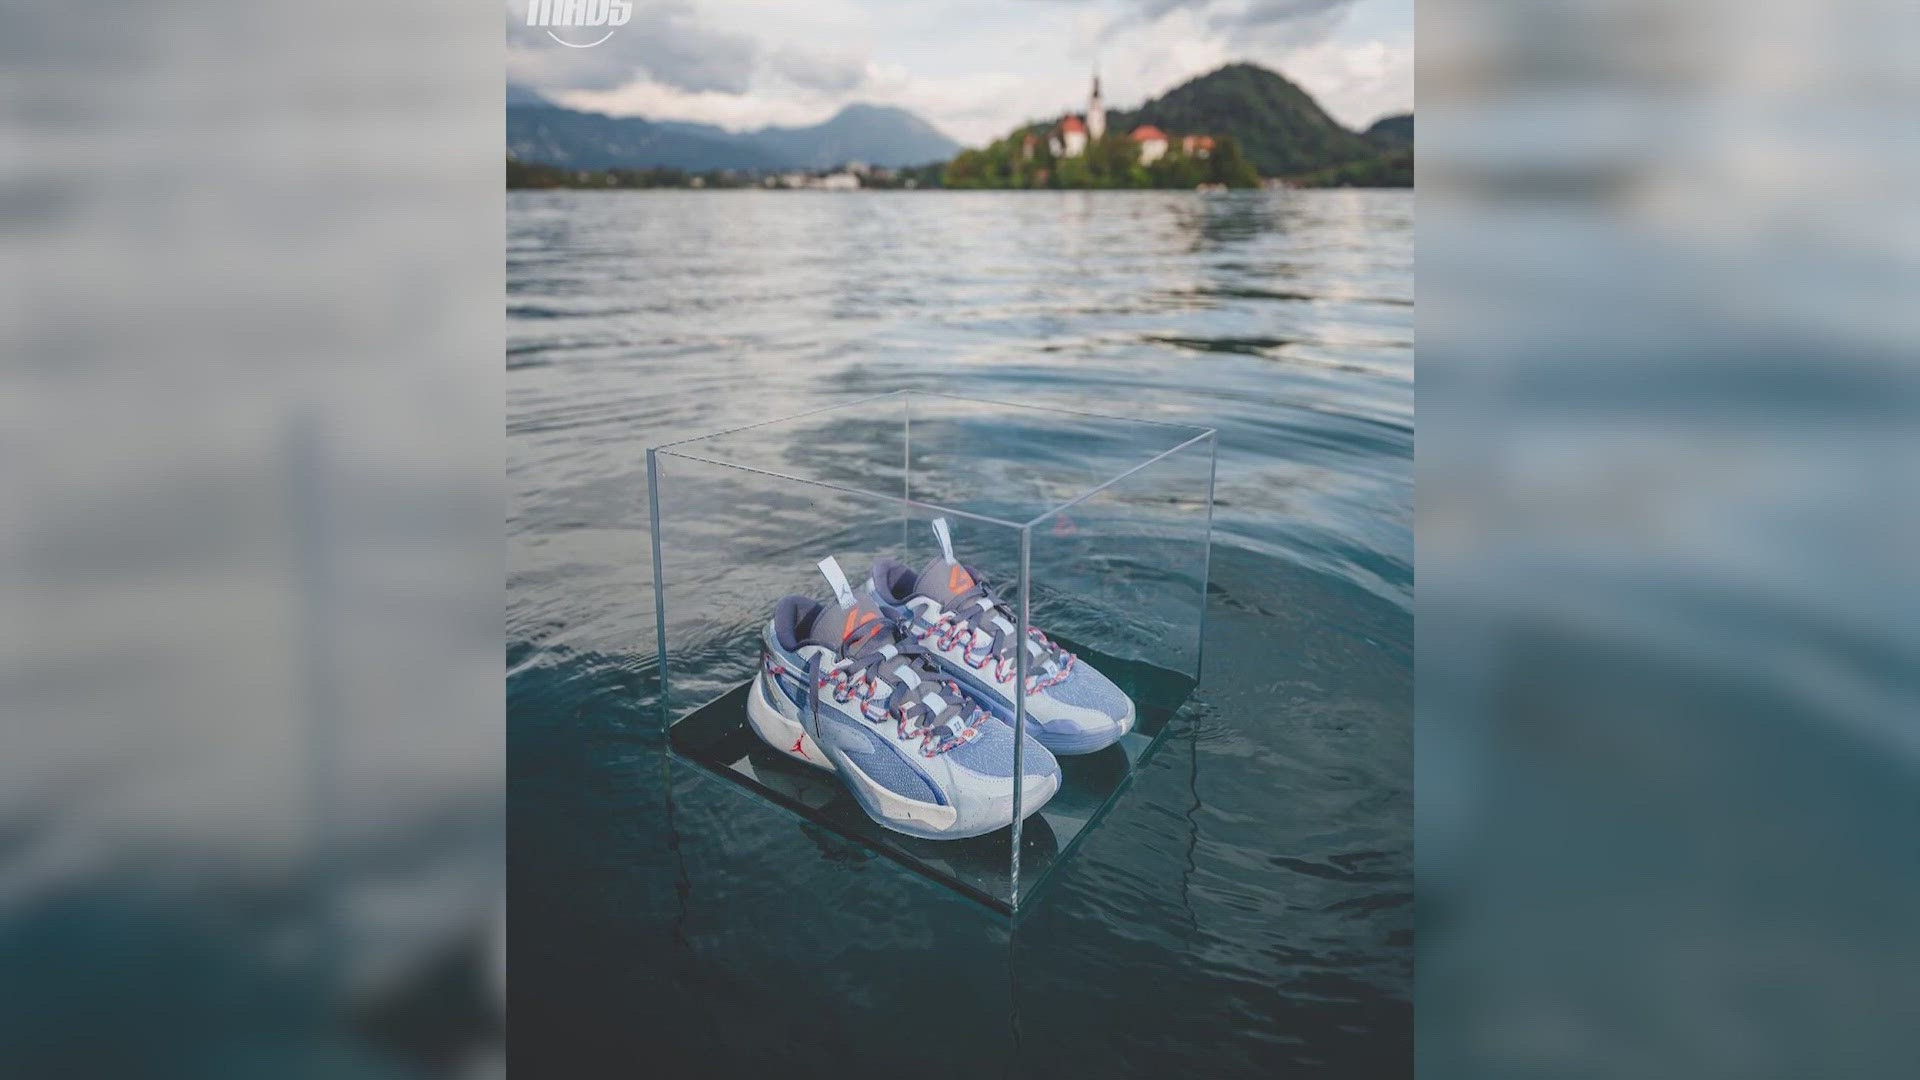 The Maverick star unveiled his Luka 2 Lake Bled Jordans in Slovenia, complemented by a basketball tournament on a floating court.